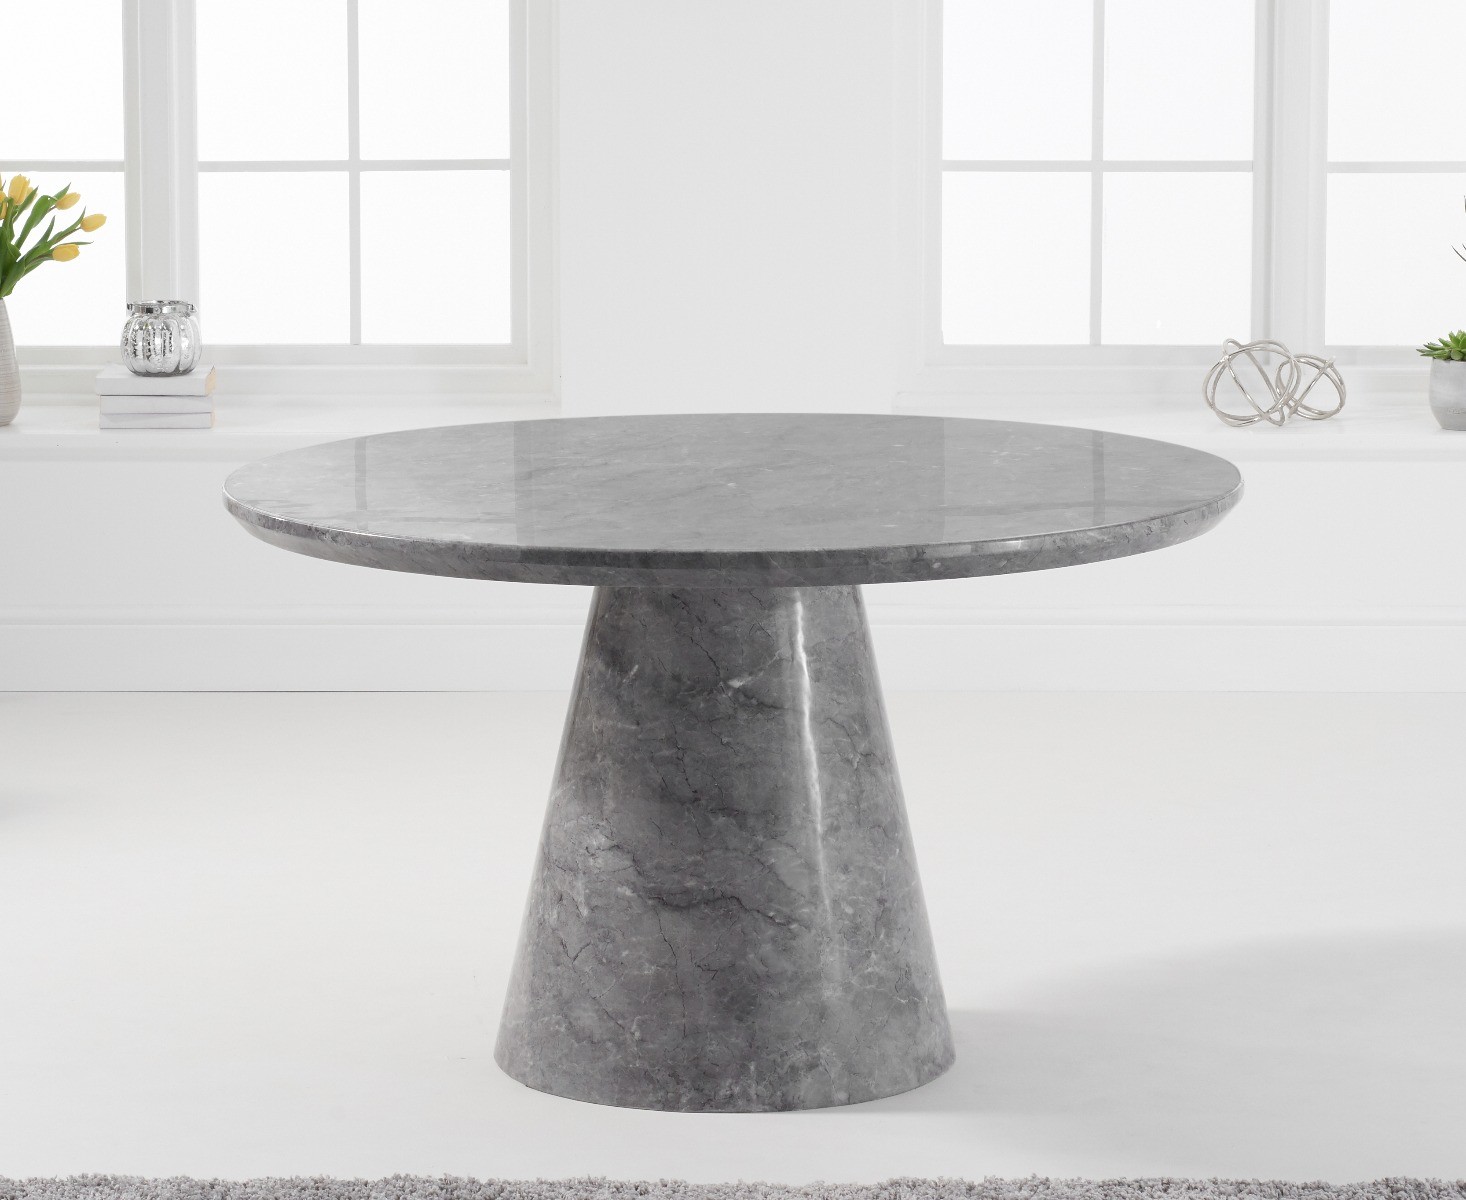 Photo 1 of Ravello 130cm round grey marble dining table with 6 white aldo chairs